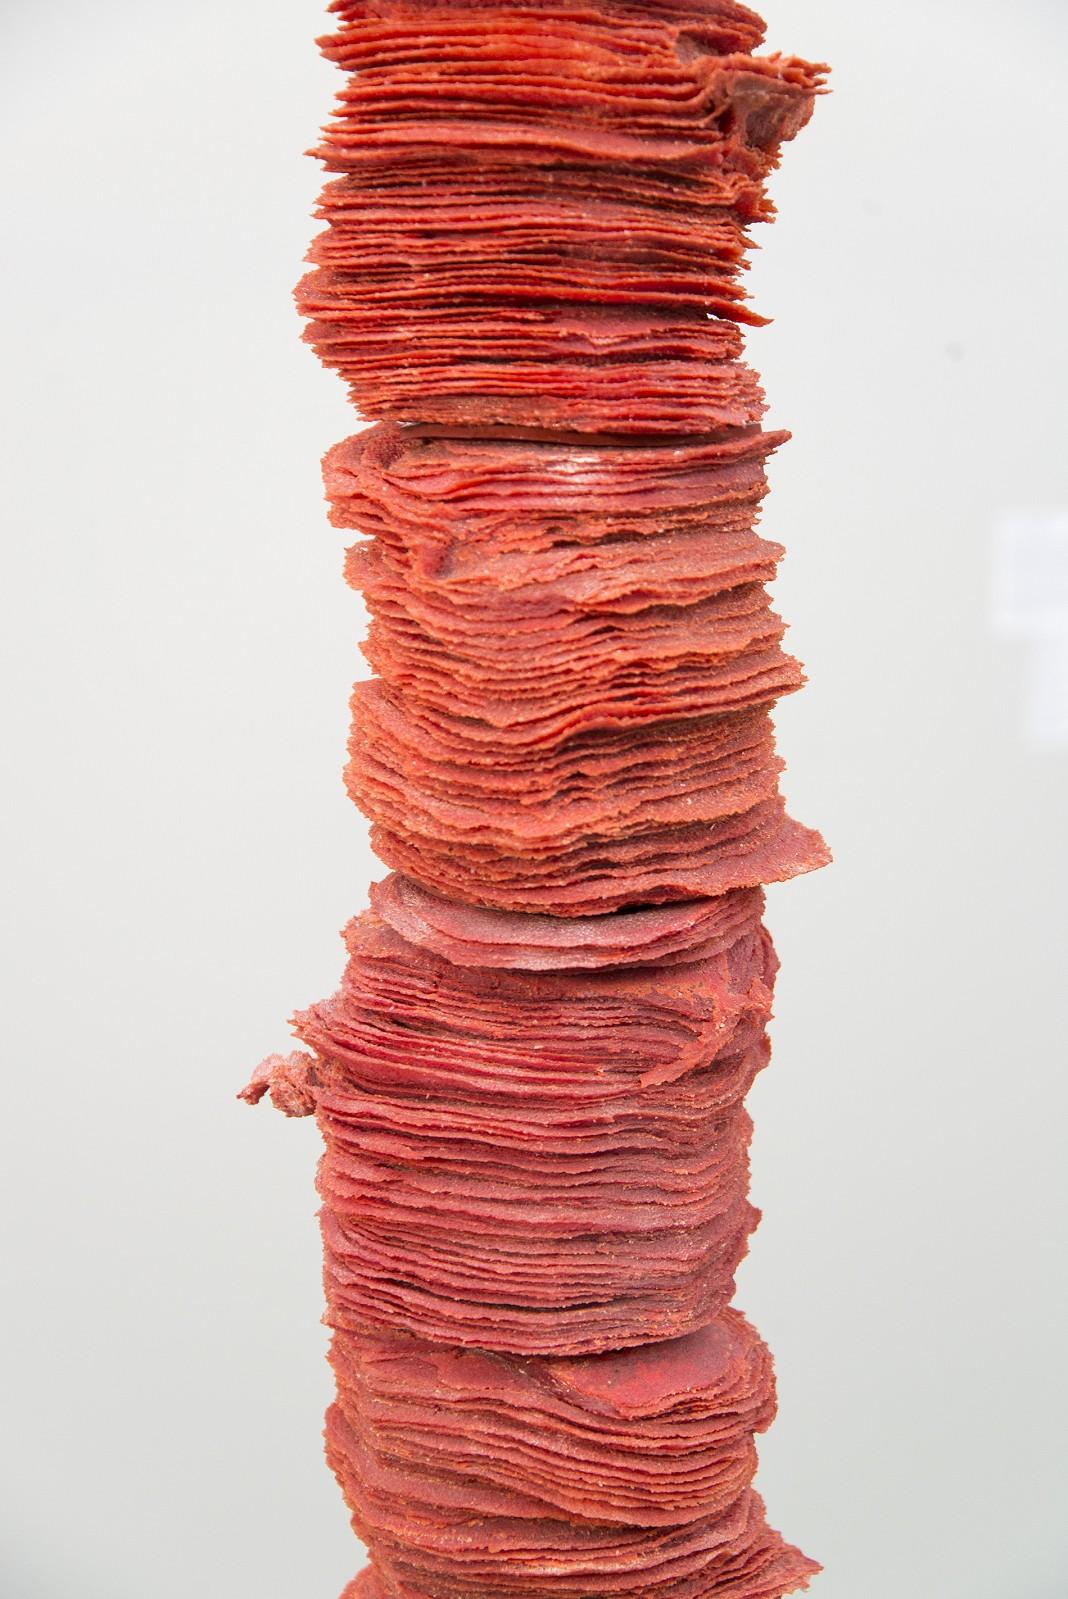 Paper-thin layers of deep red glass frit (special ground glass) are carefully stacked and fused in these striking columns created by Canadian artist Cheryl Wilson-Smith.

The measurements of each column are all 12 inches in width and depth and vary